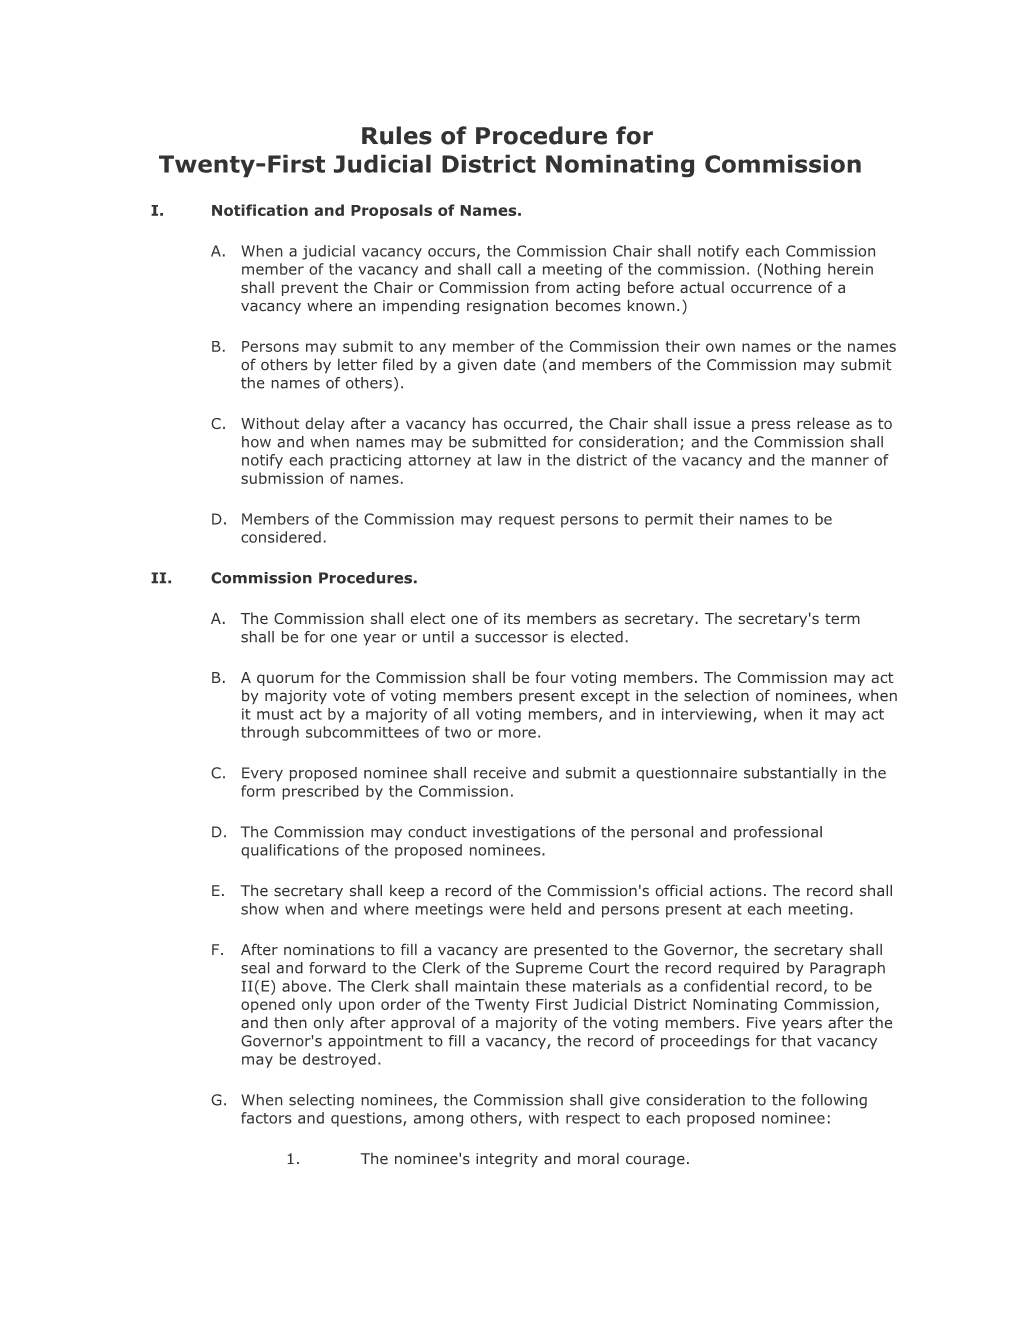 Rules of Procedure for Twenty-First Judicial District Nominating Commission